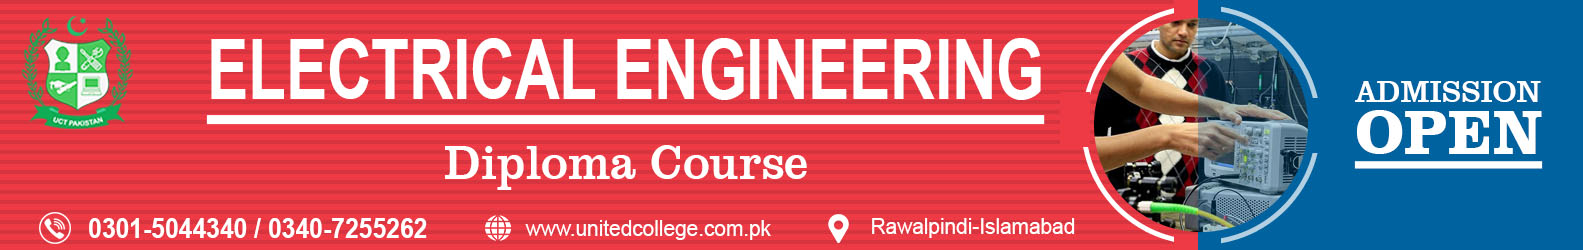 ELECTRICAL ENGINEERING COURSE